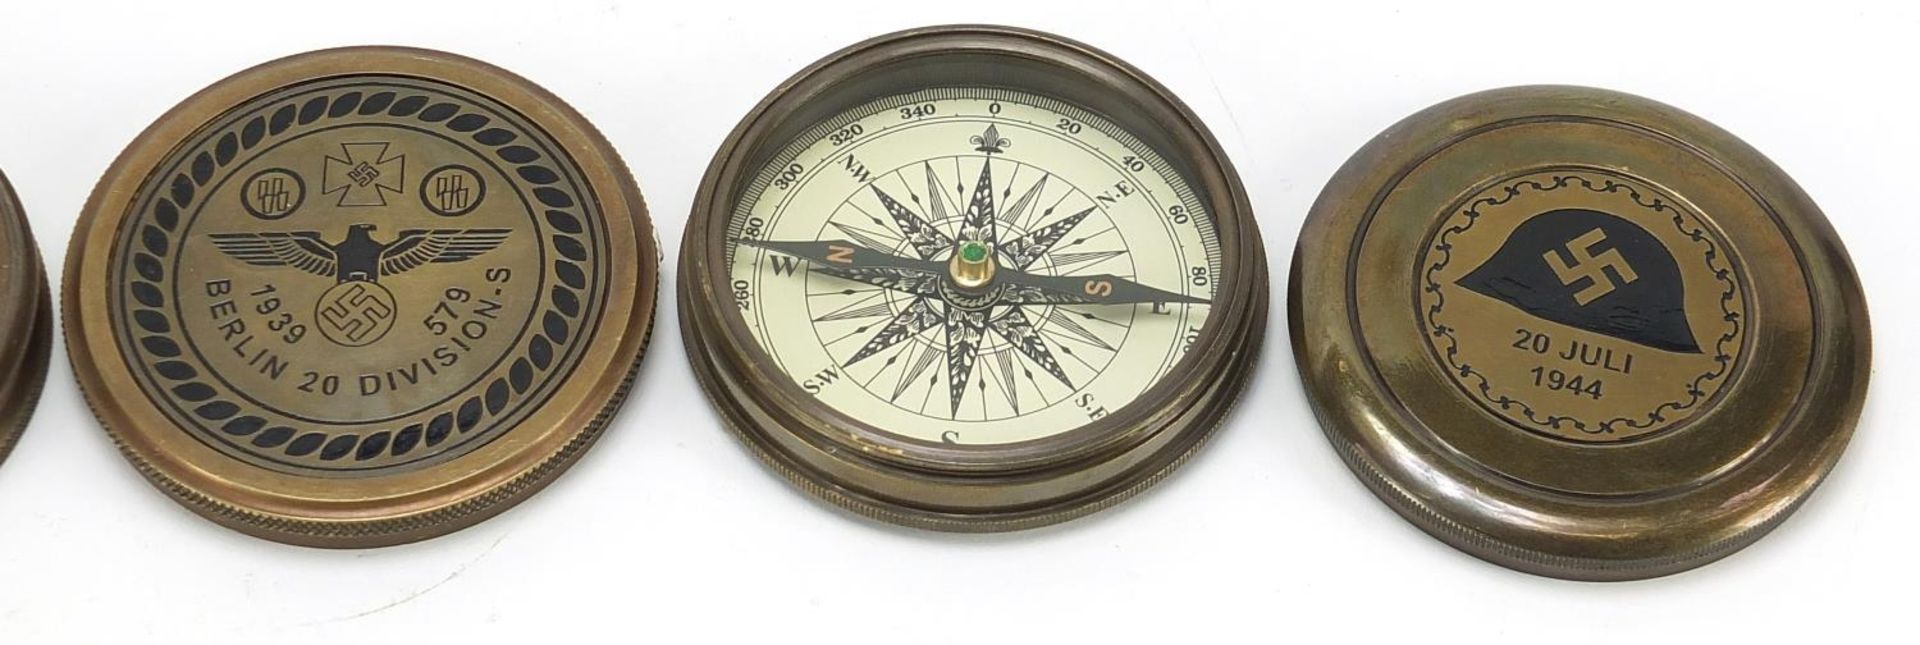 Three naval interest brass compasses including two German style examples, each 7.5cm in diameter - Image 3 of 4